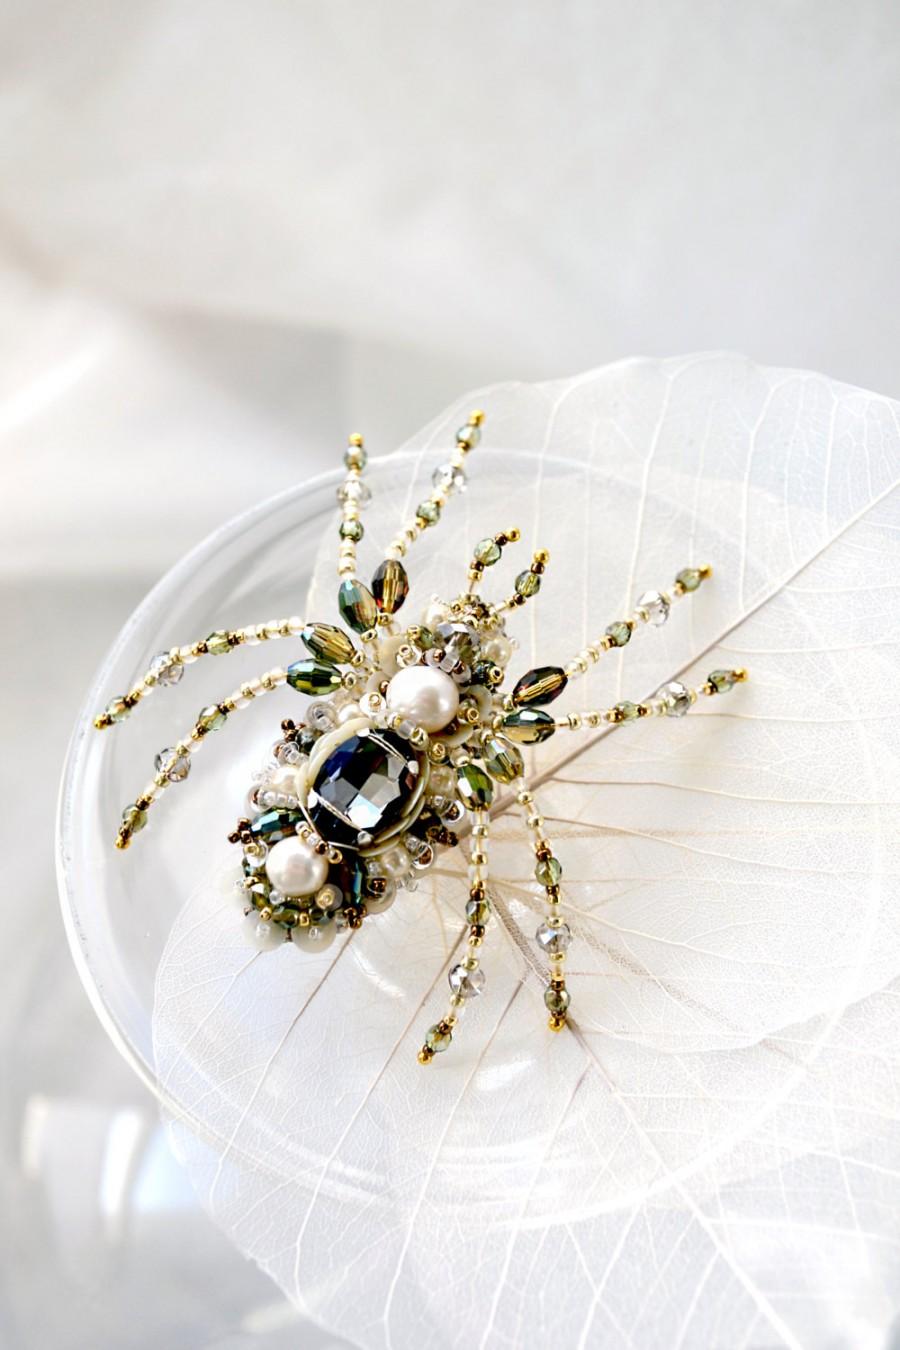 Wedding - Spider jewelry Unique Statement jewelry Spider brooch beadwork Designer jewelry Luxury gift for wife Mothers day gift Birthday gift for her